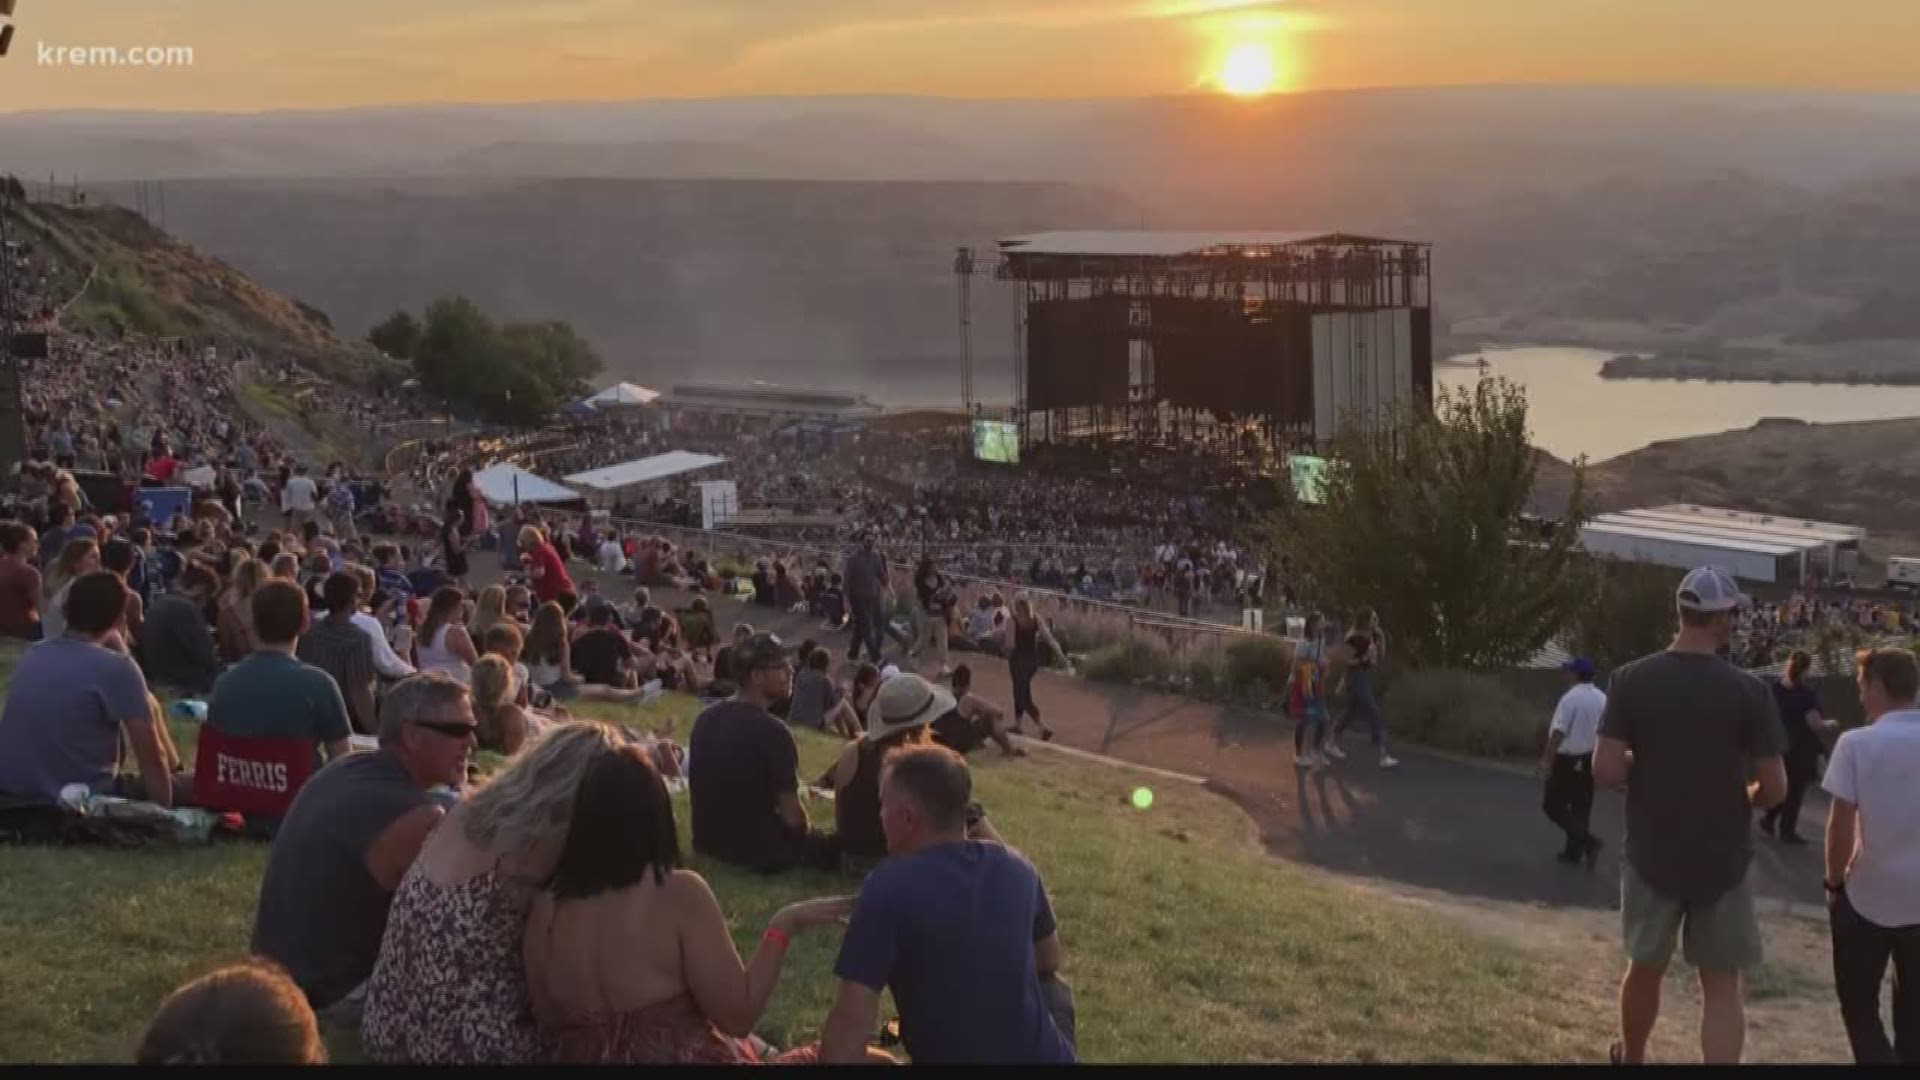 With concerts at The Gorge amphitheater postponed, leaders in Grant County fear local revenues could take a big hit.